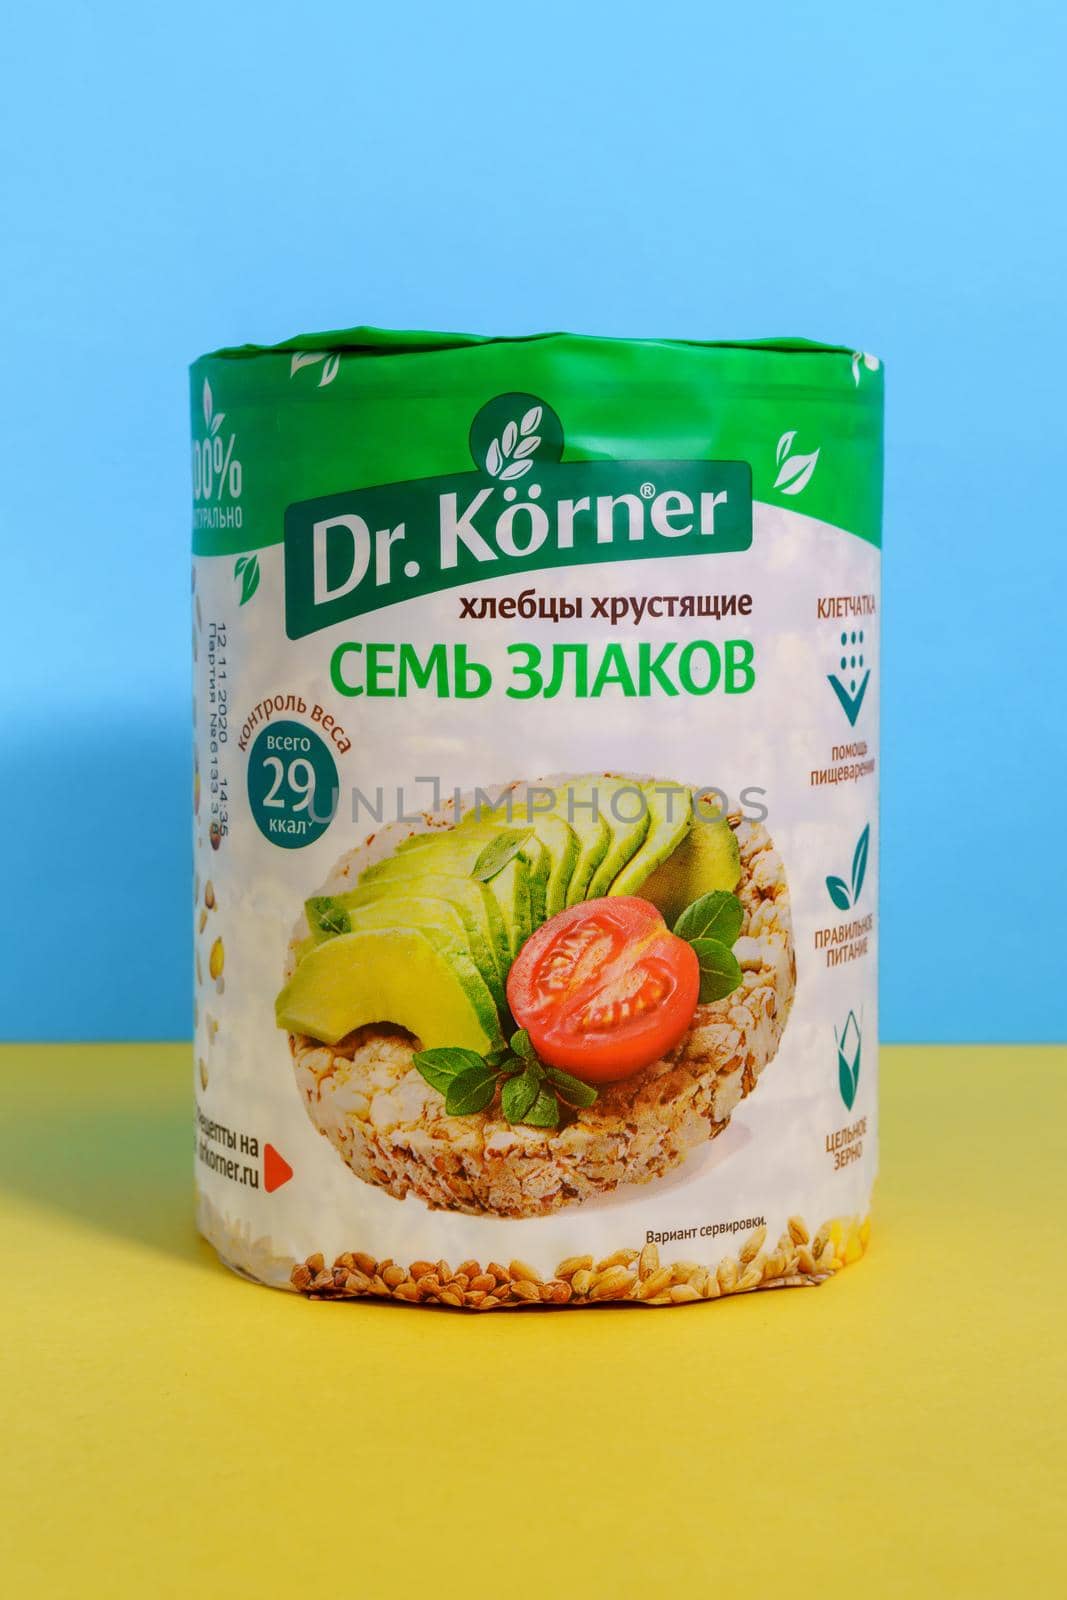 Tyumen, Russia - April 14, 2021: dr. korner The main activity of the company is confectionery products.